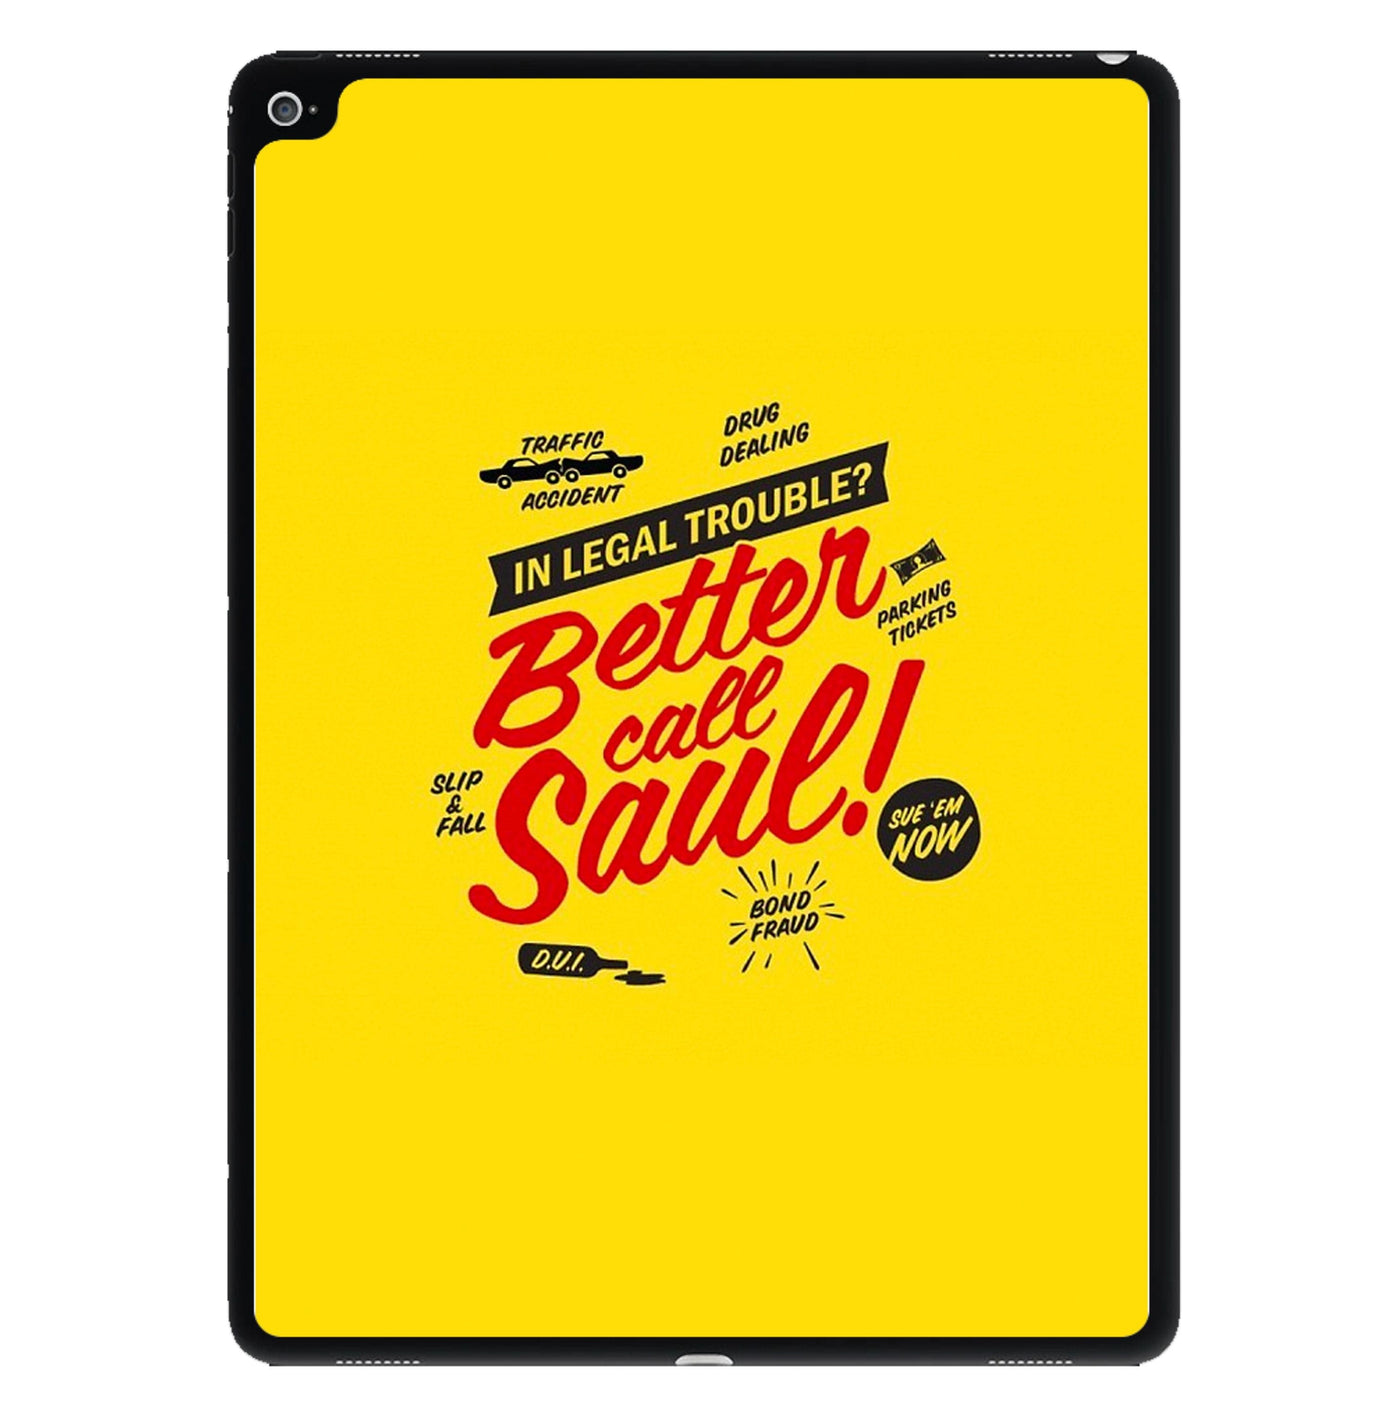 In Legal Trouble? Better Call Saul iPad Case